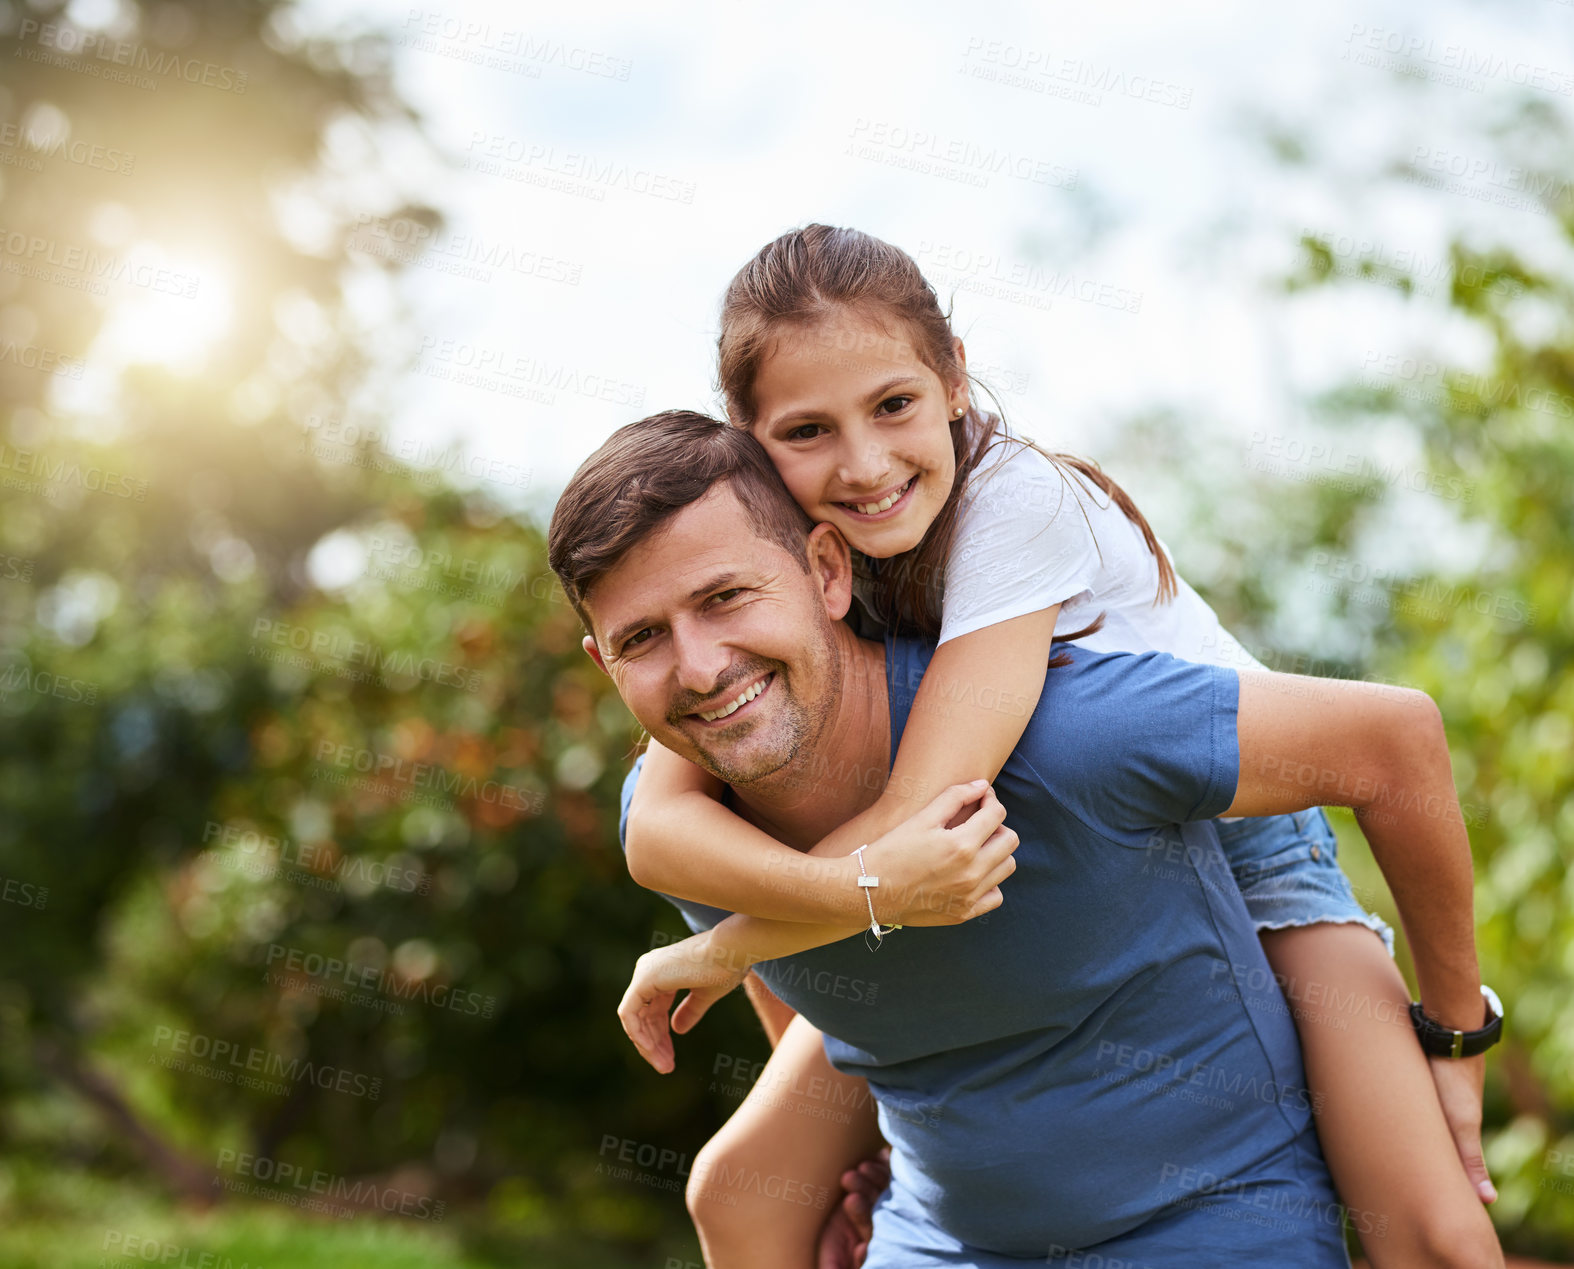 Buy stock photo Portrait of a cheerful young man giving his daughter a piggyback ride outside in a park during the day